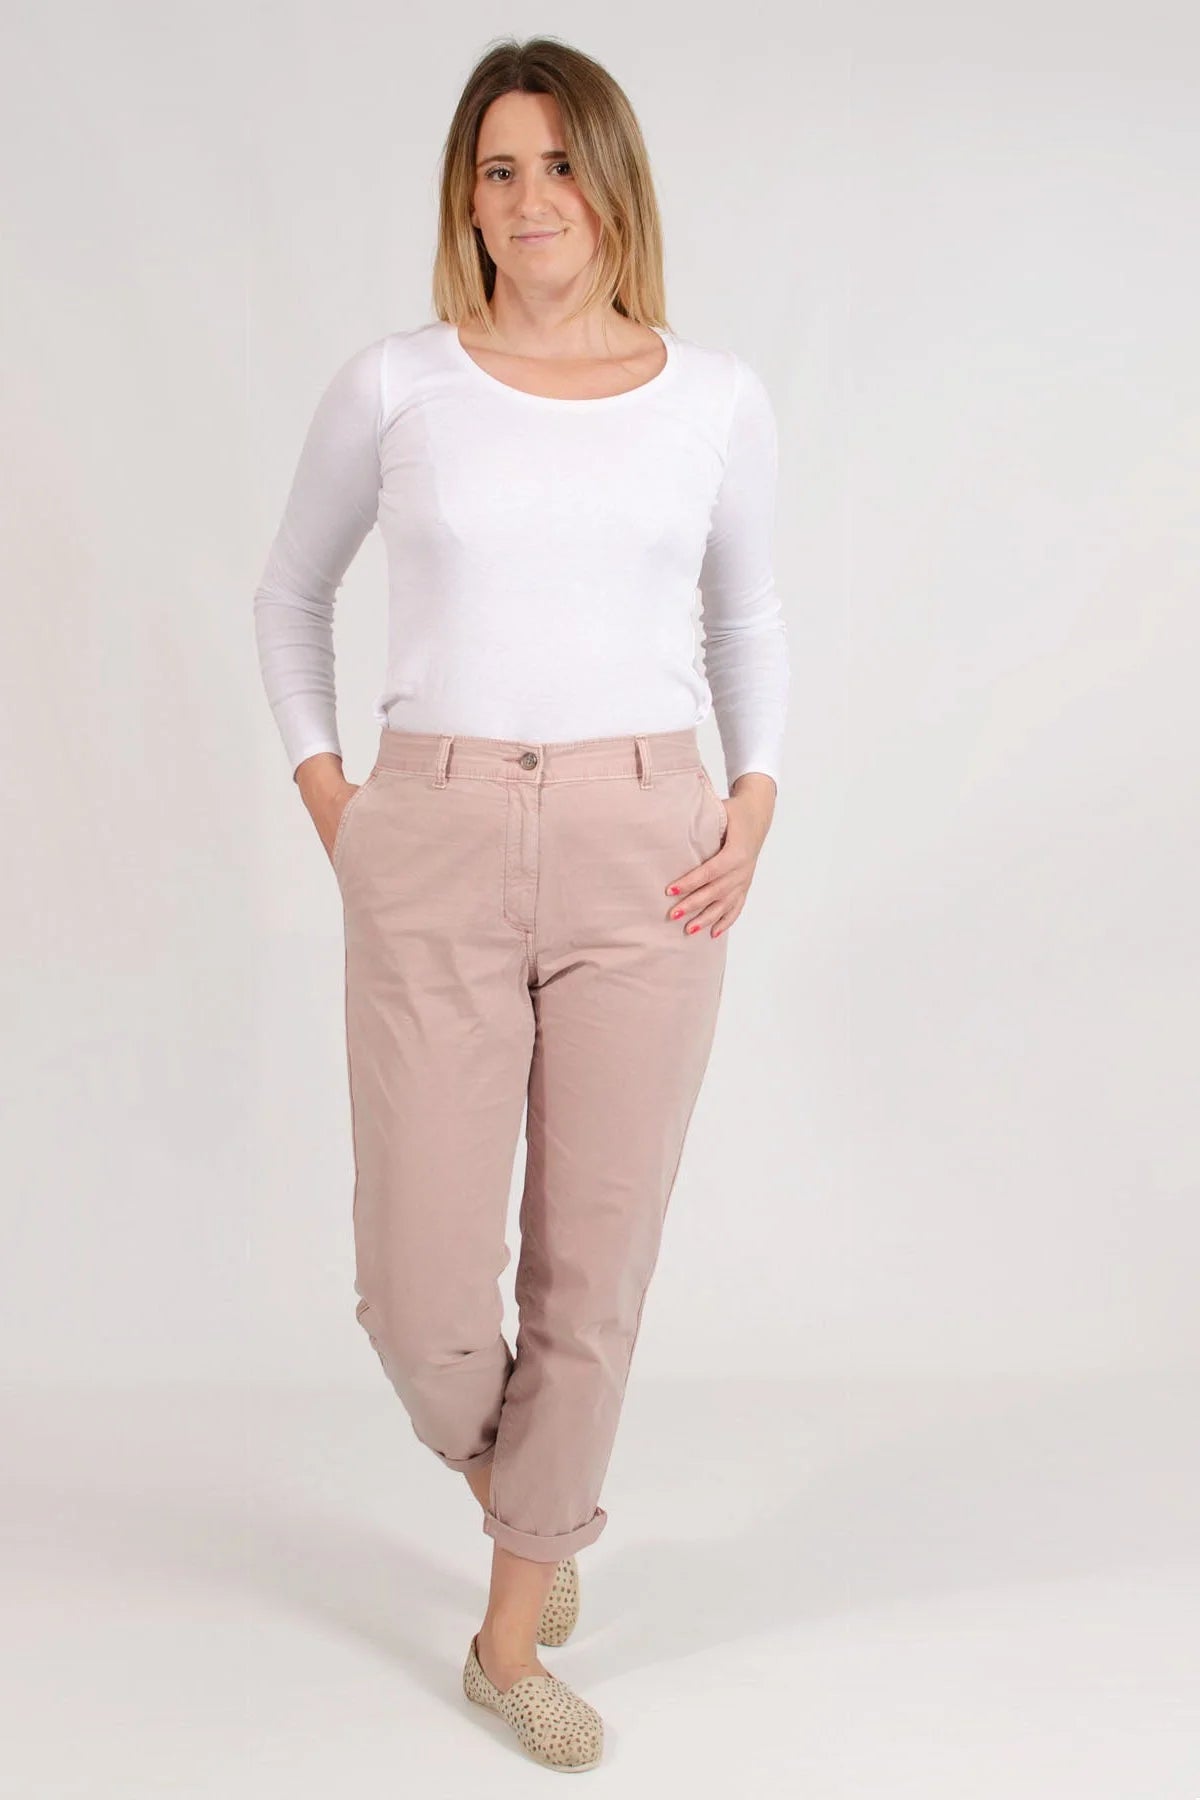 M&S Ankle Grazer Chino Trousers